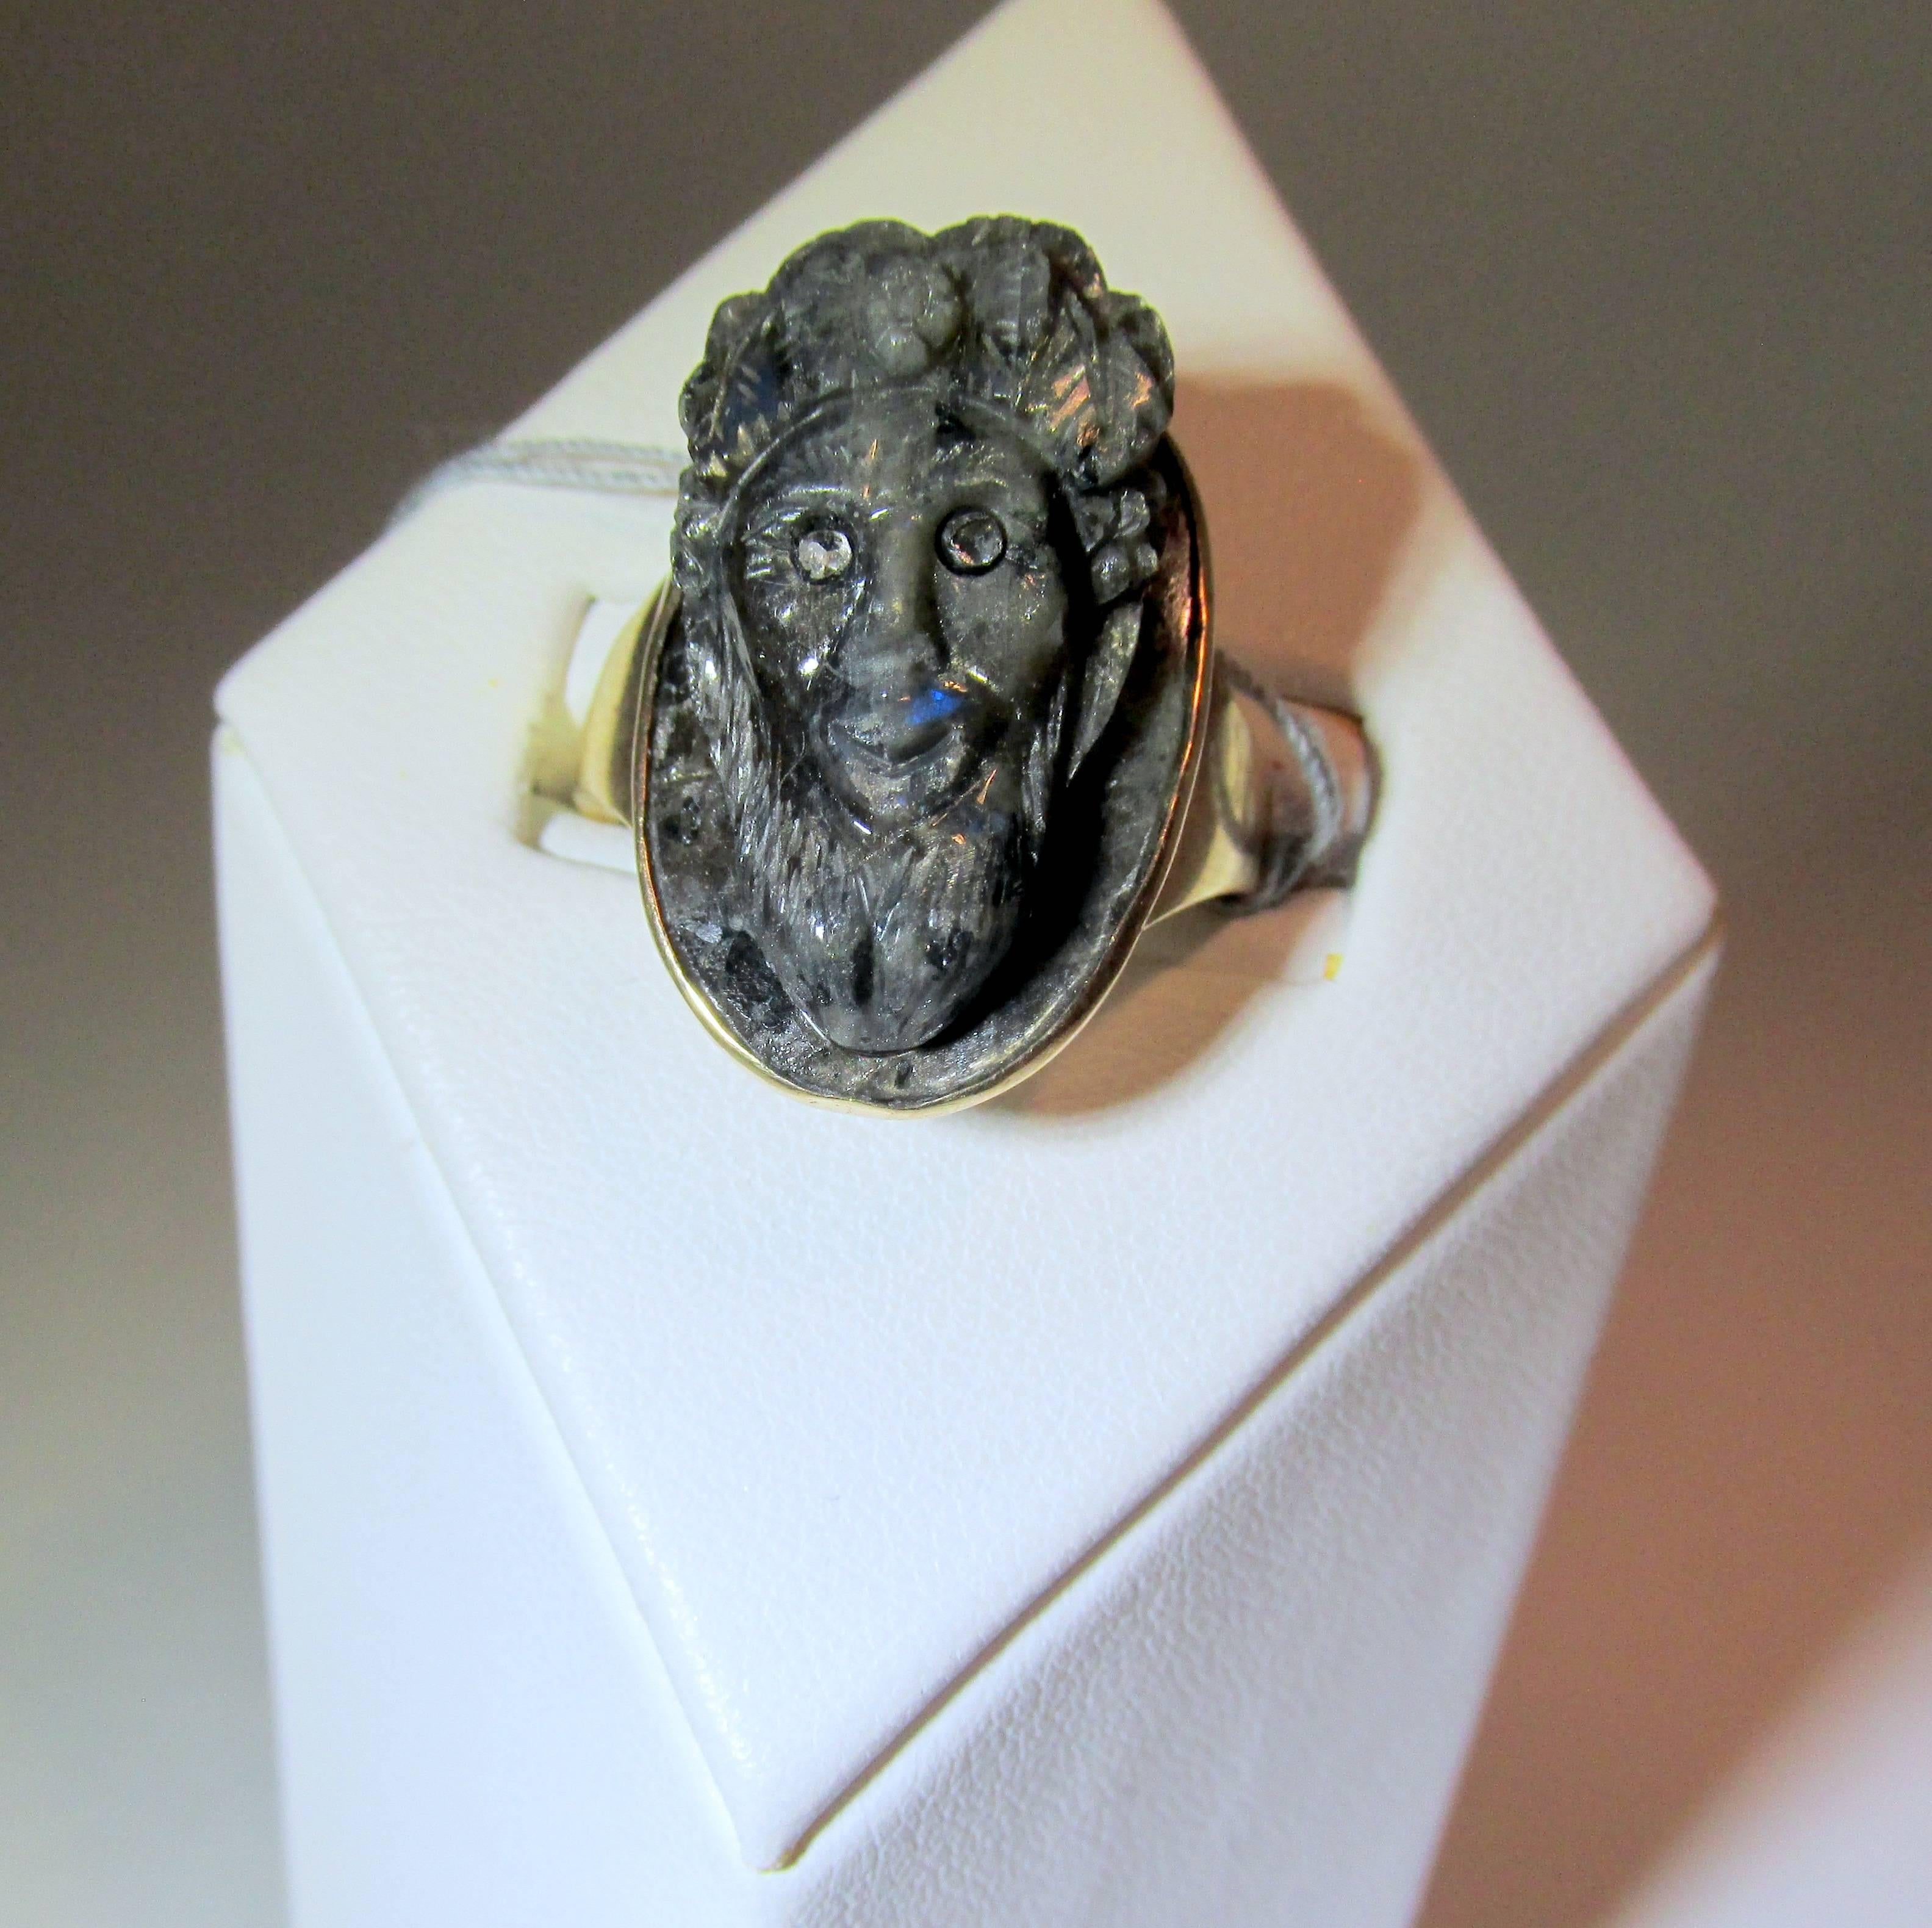 With rose cut diamond eyes, this is a well executed, 3 dimensional carving held in a yellow gold bezel.  This antique ring is in fine condition, we can size this ring to any size.